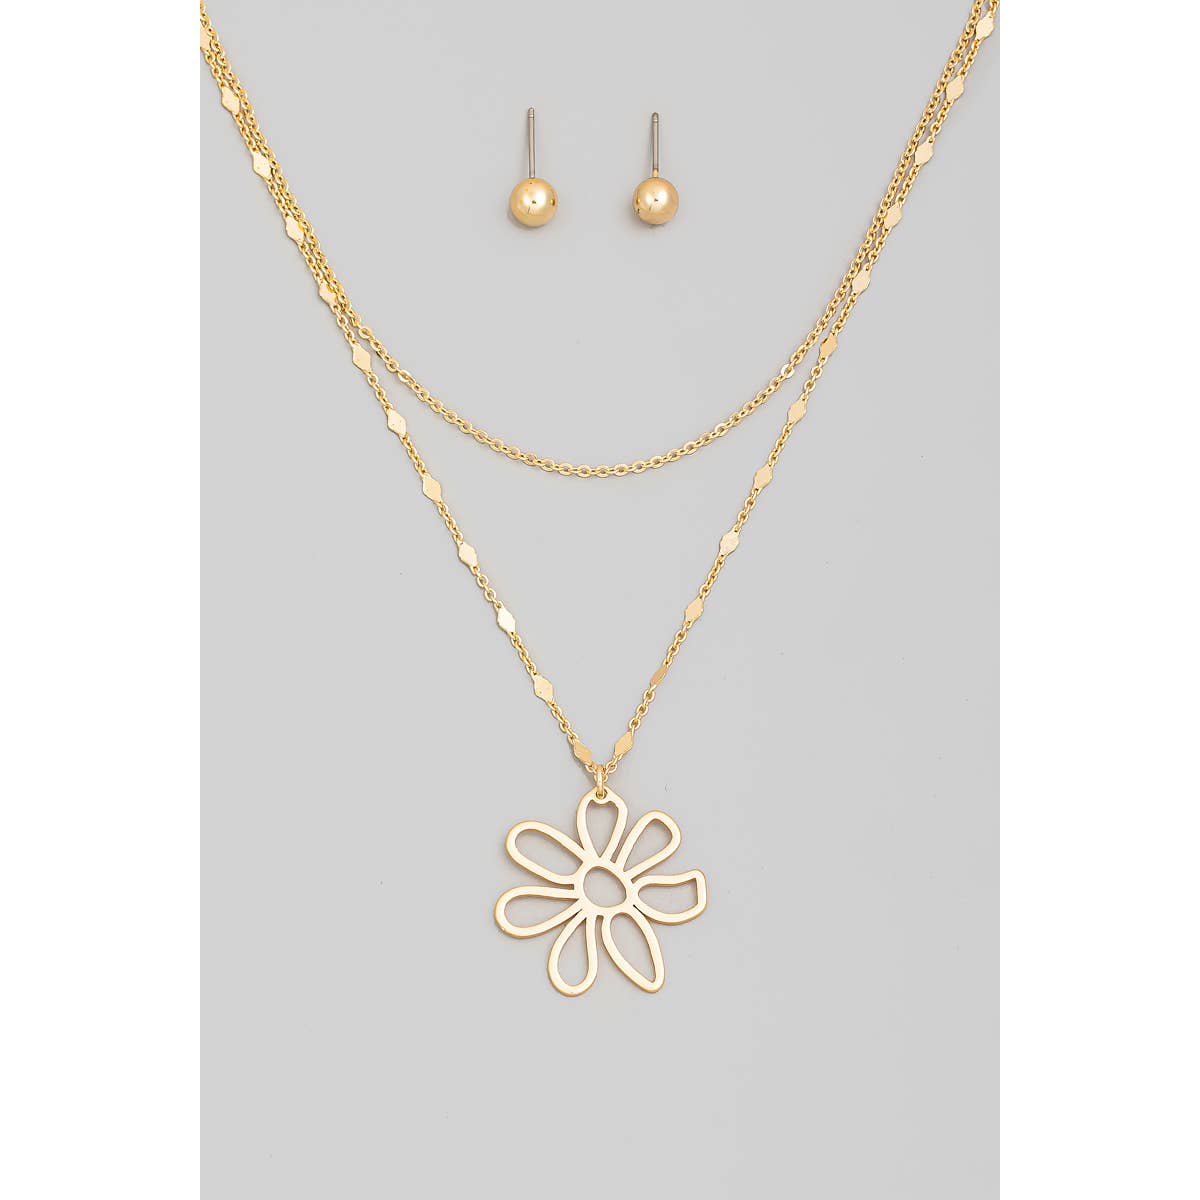 Flower Pendant Layered Chains Necklace Set | Stuffology Boutique-Necklaces-The Looks by Fame Accessories-Stuffology - Where Vintage Meets Modern, A Boutique for Real Women in Crosbyton, TX